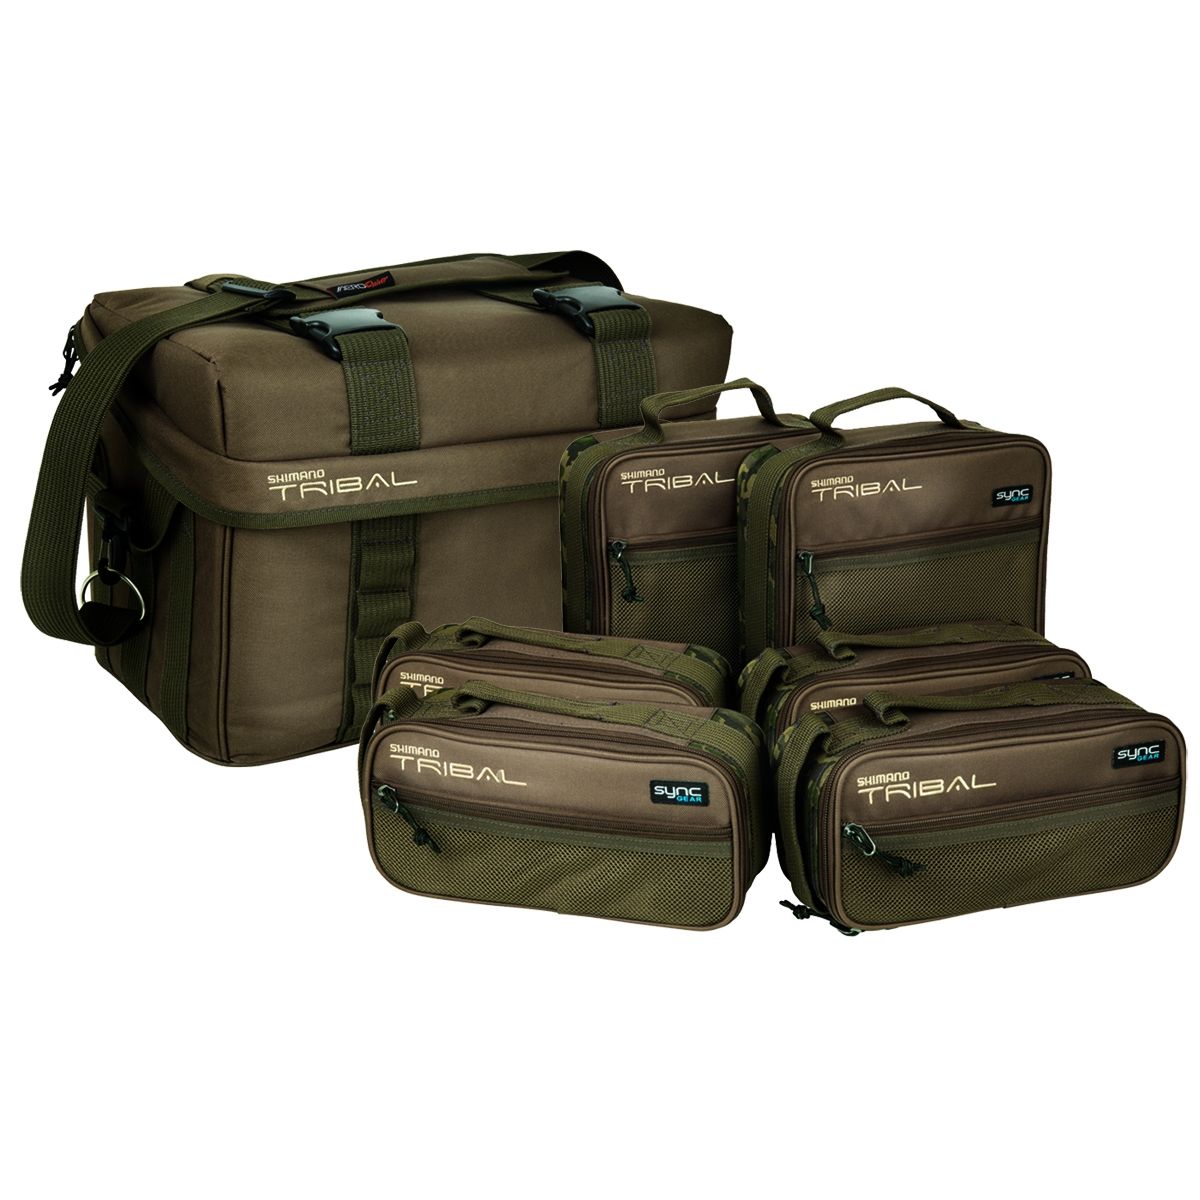 Cut Price Shimano Tactical Full Compact Carryall High Quality